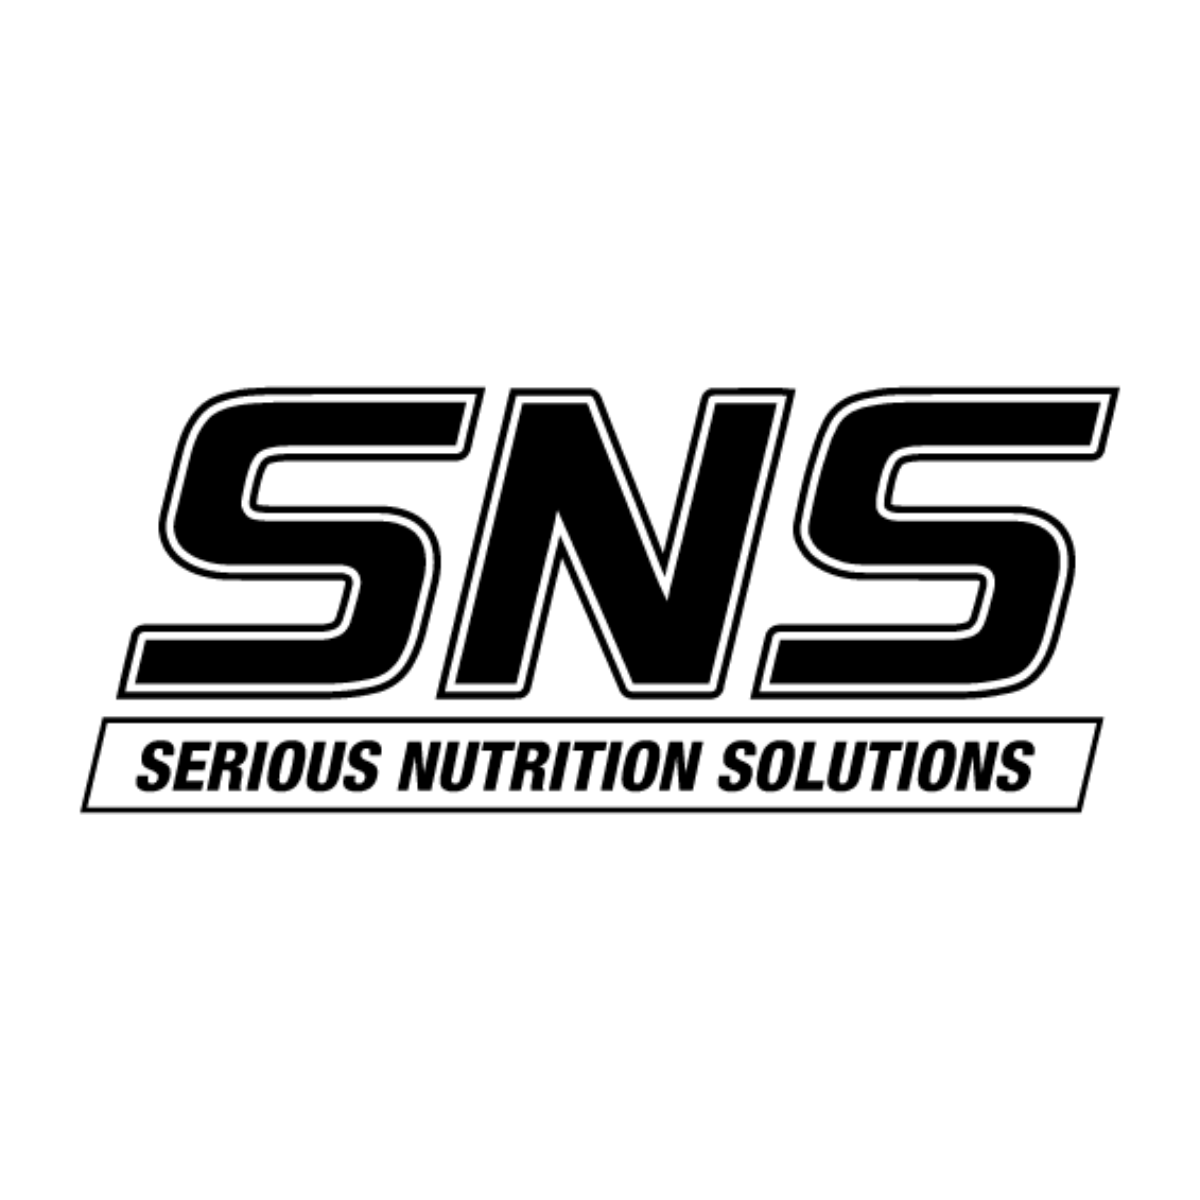 Serious Nutrition Solutions (SNS)